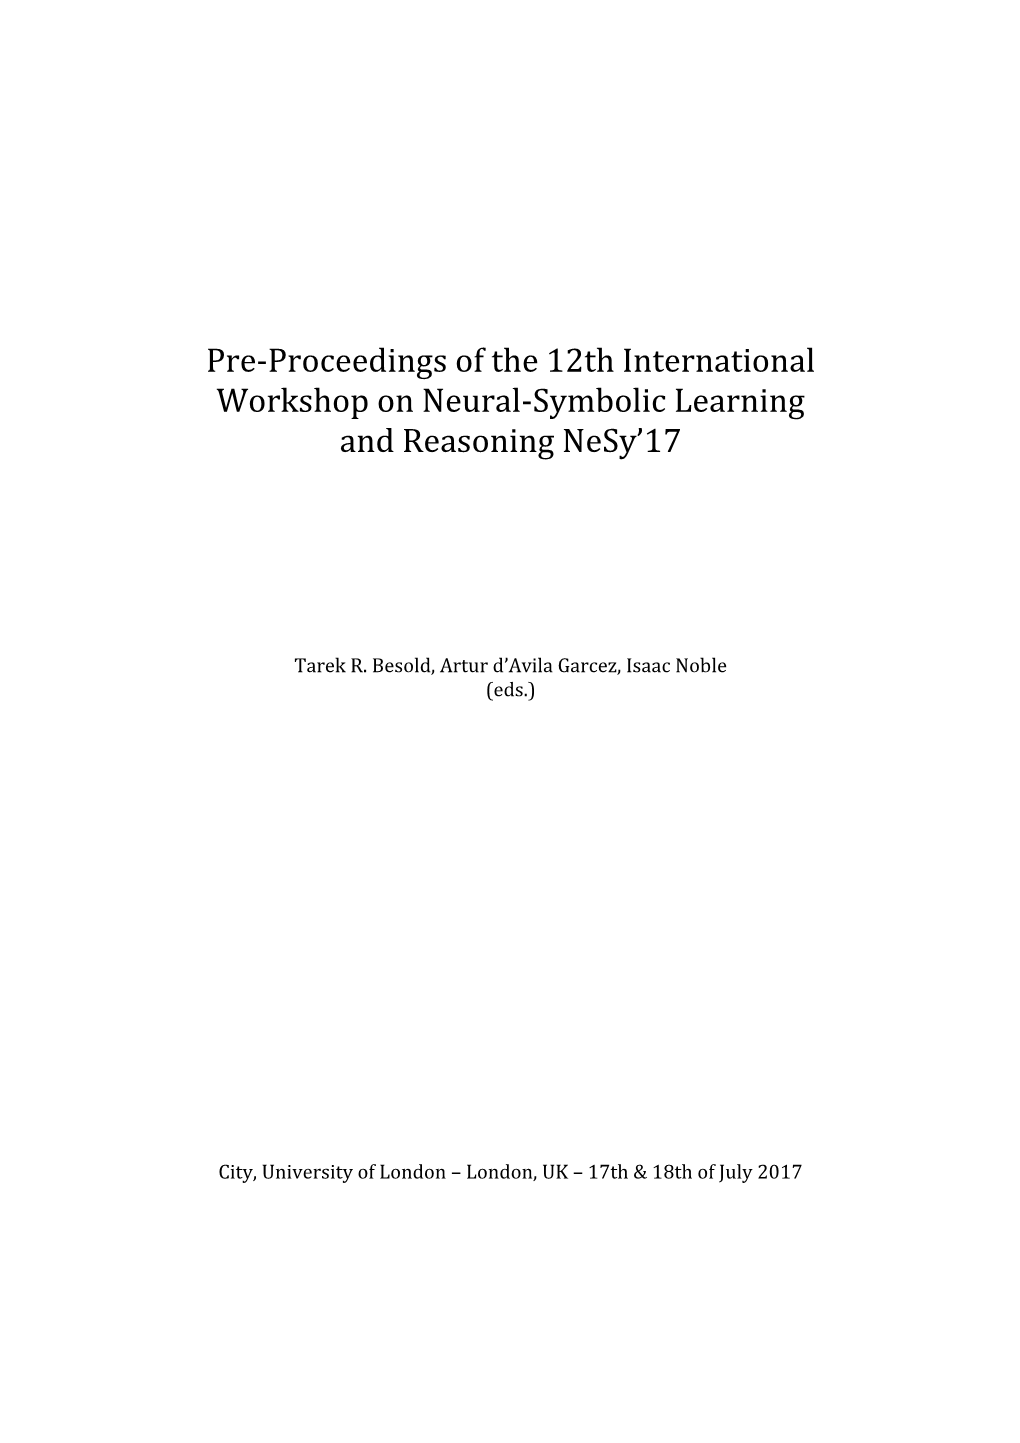 Pre-Proceedings of the 12Th International Workshop on Neural-Symbolic Learning and Reasoning Nesy’17